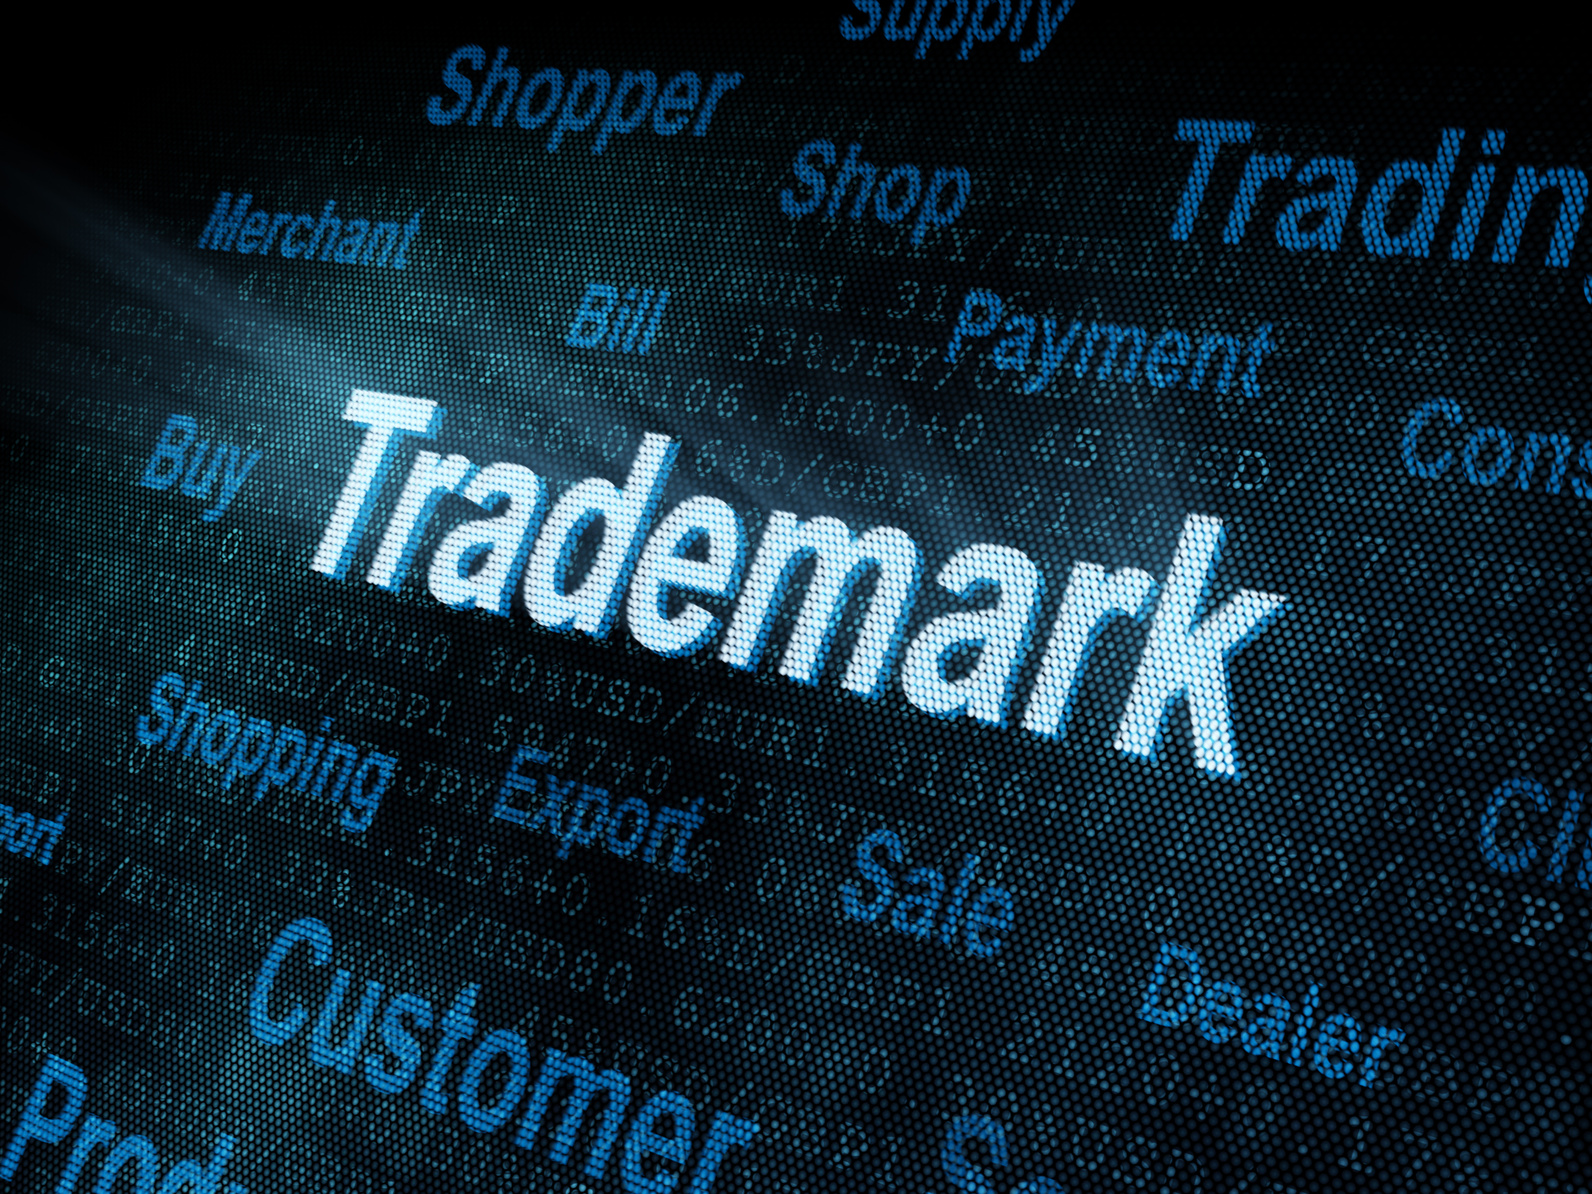 Trademark Laws as Applied to Tobacco Products